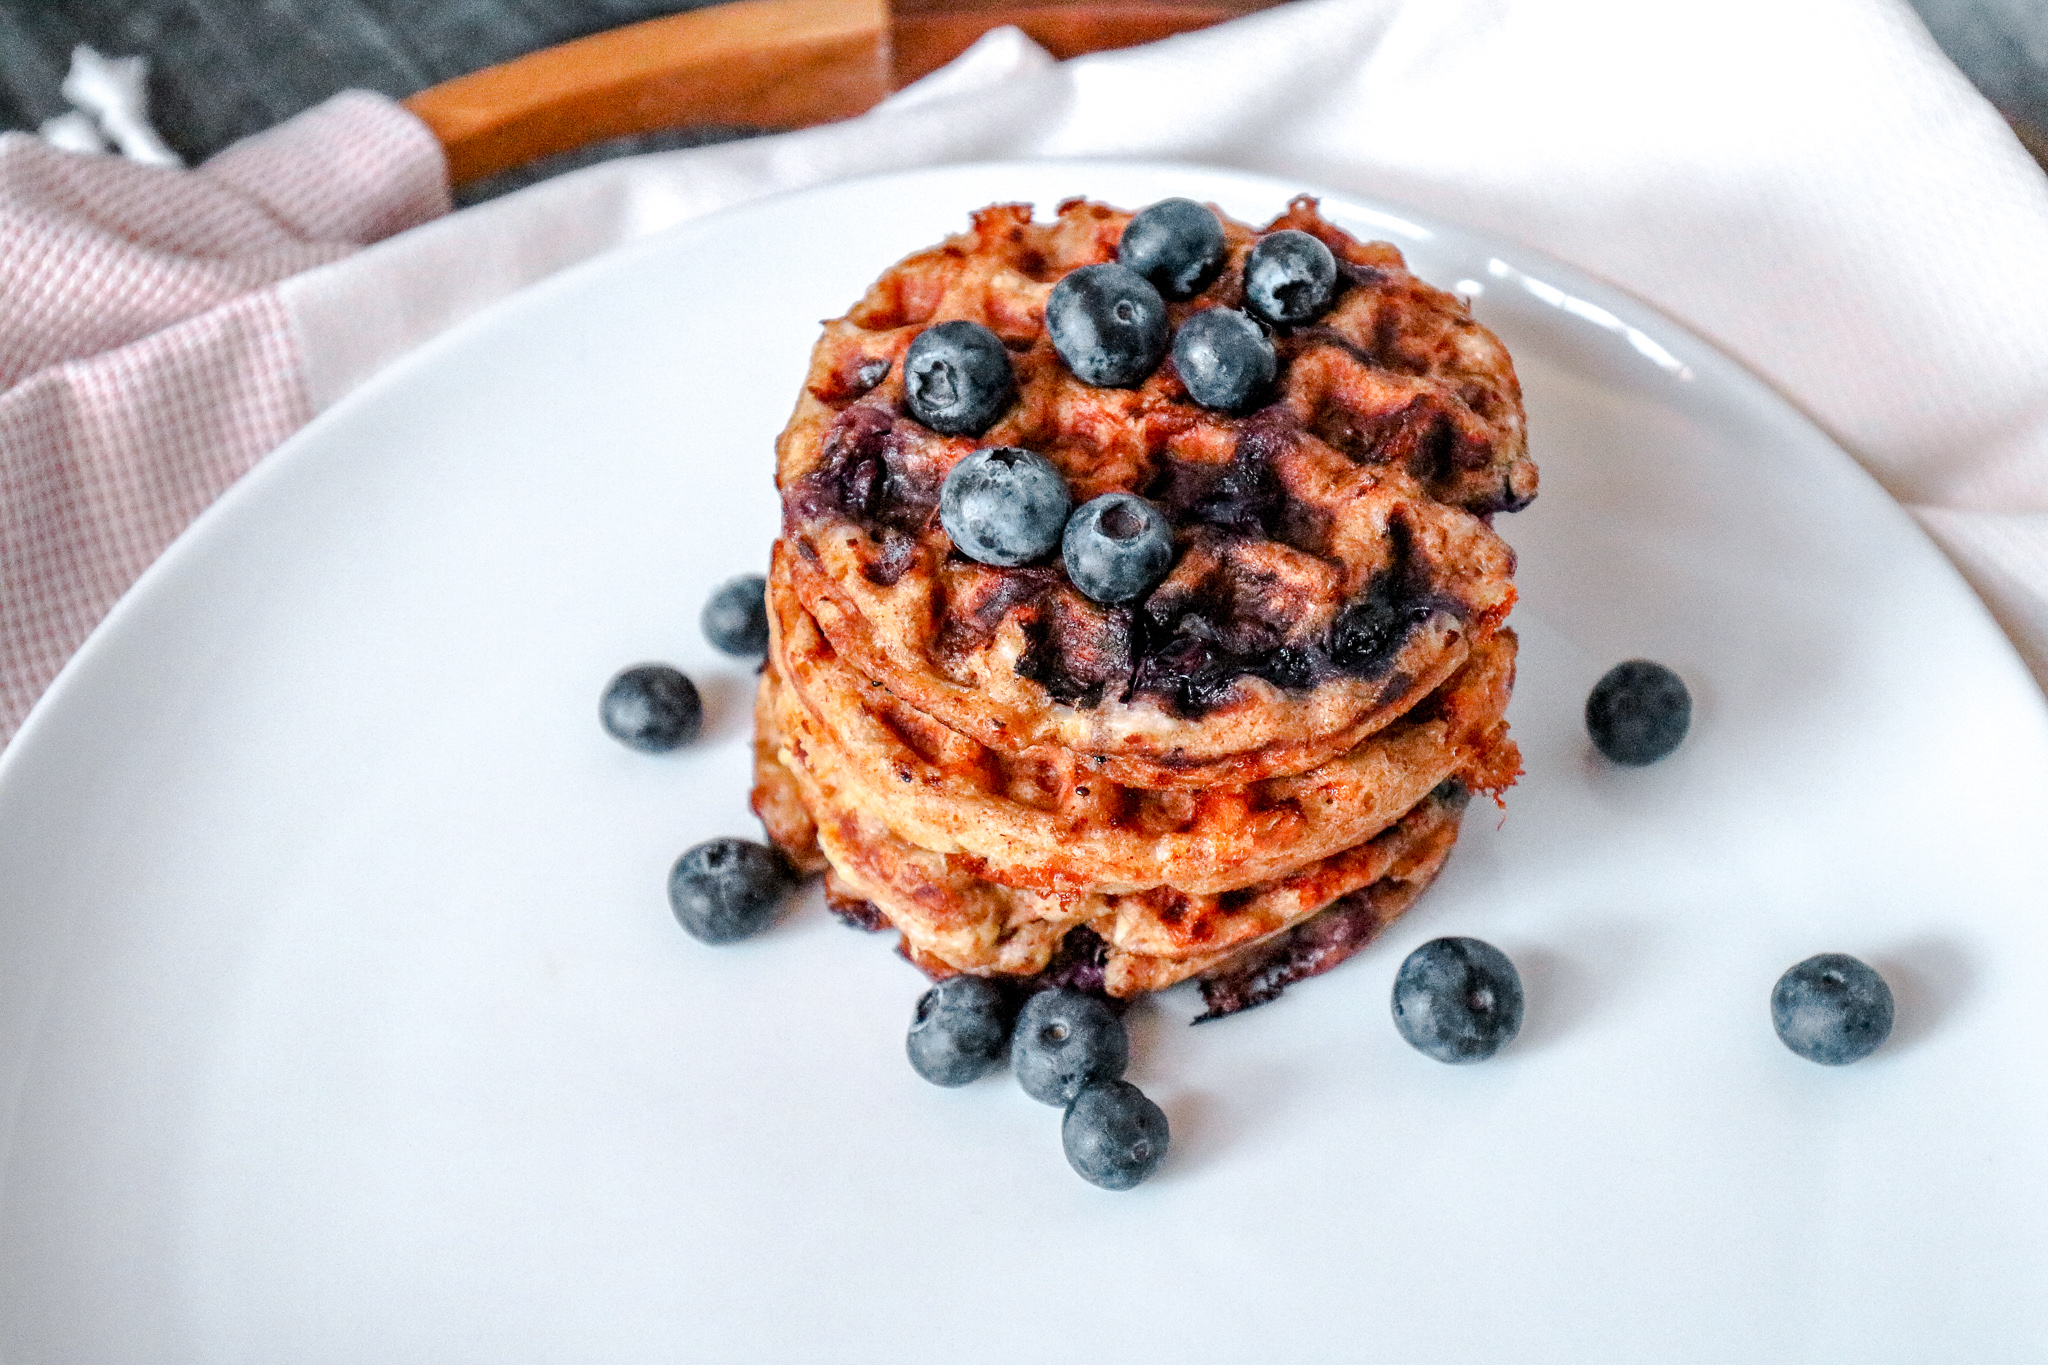 A white plate with four mini chaffles stacked on top of it with blueberries on top and sprinkled on the plate on top of a towel underneath.